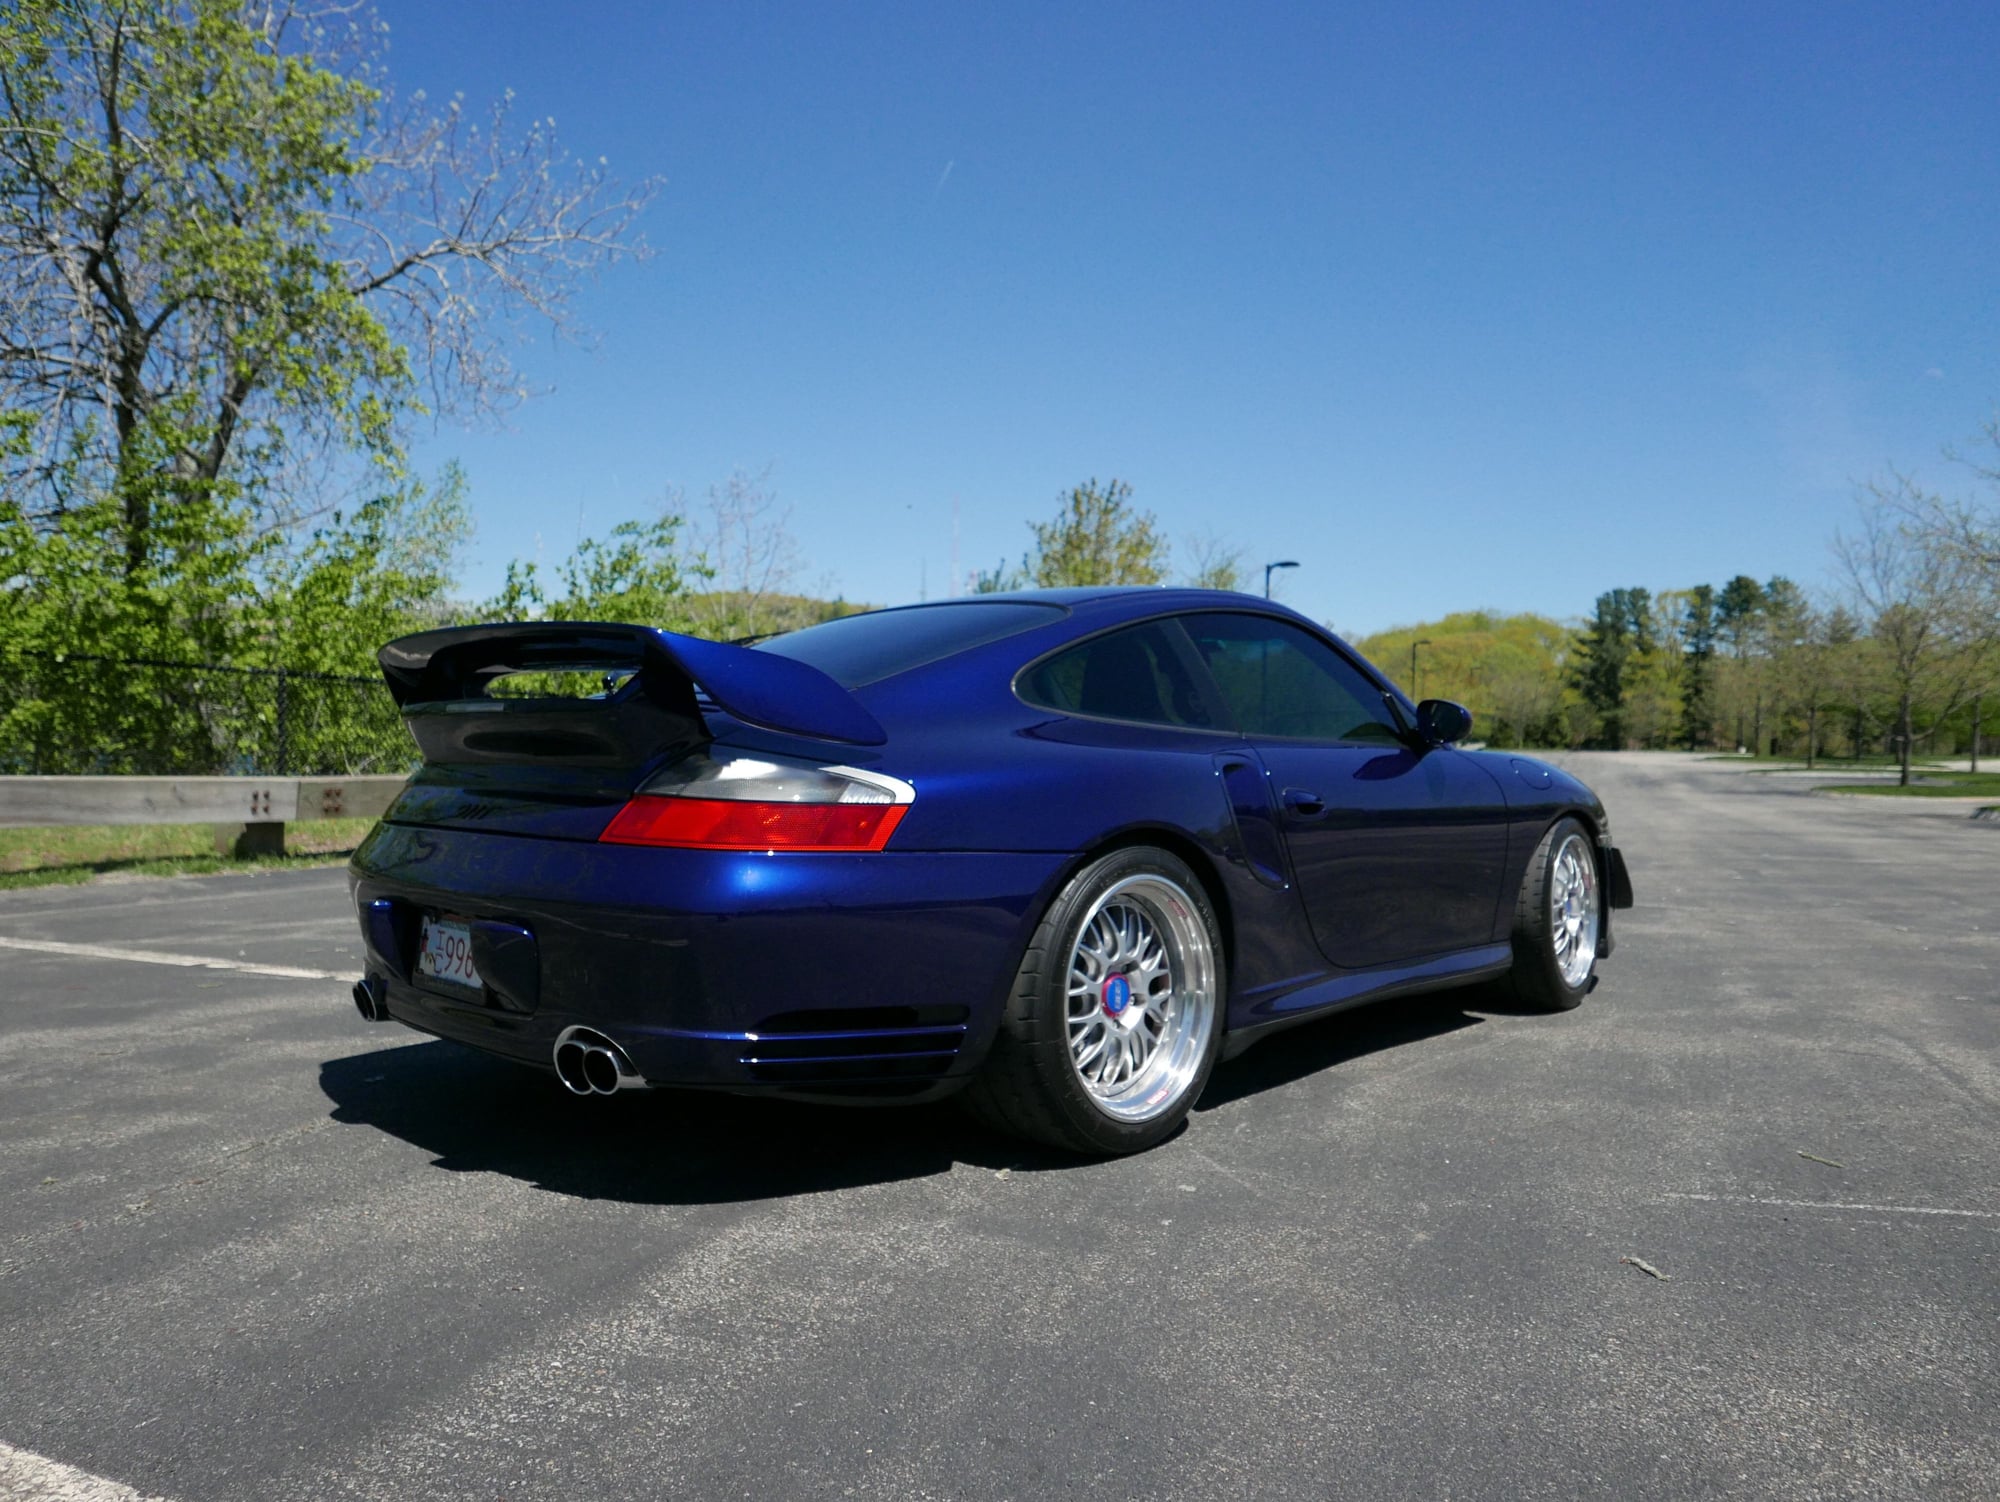 2003 Porsche 911 - FS: 996 Turbo X50 Coupe *Low Miles *Manual*Immaculate*Lapis Blue - Used - VIN WP0AB29993S688598 - 29,547 Miles - 6 cyl - AWD - Manual - Coupe - Blue - Weston, MA 02493, United States